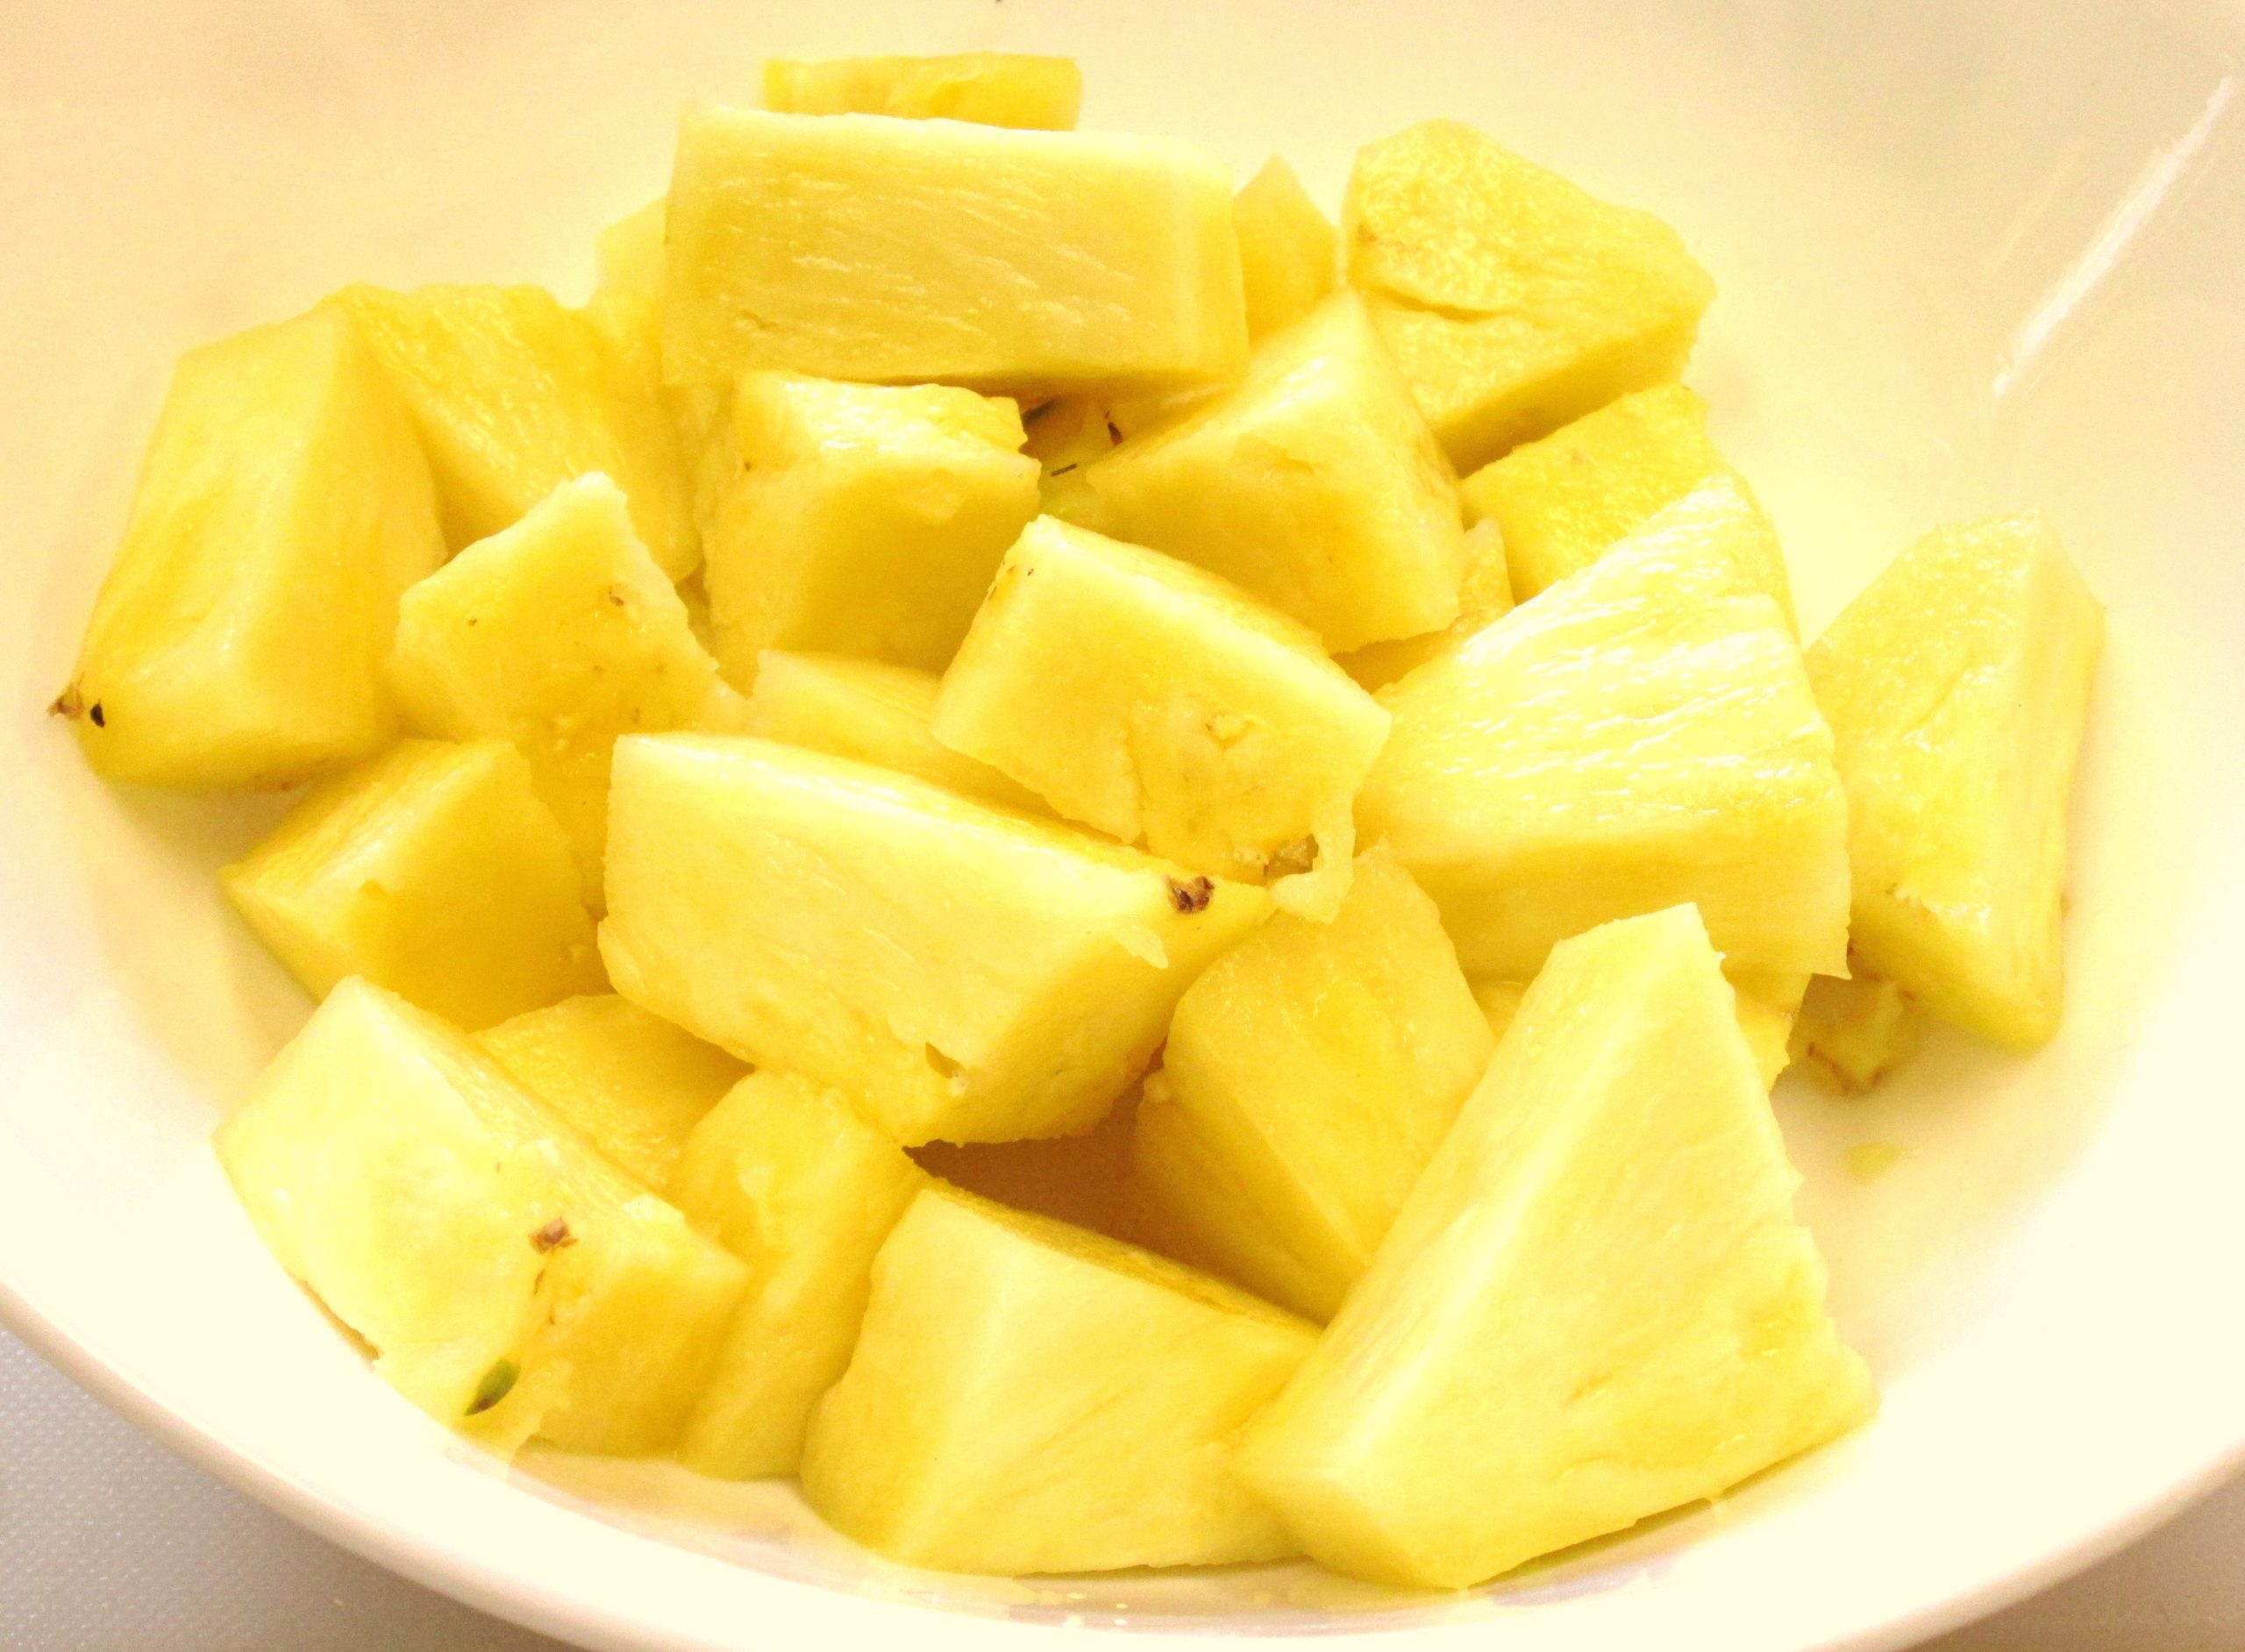 How to cut a Pineapple